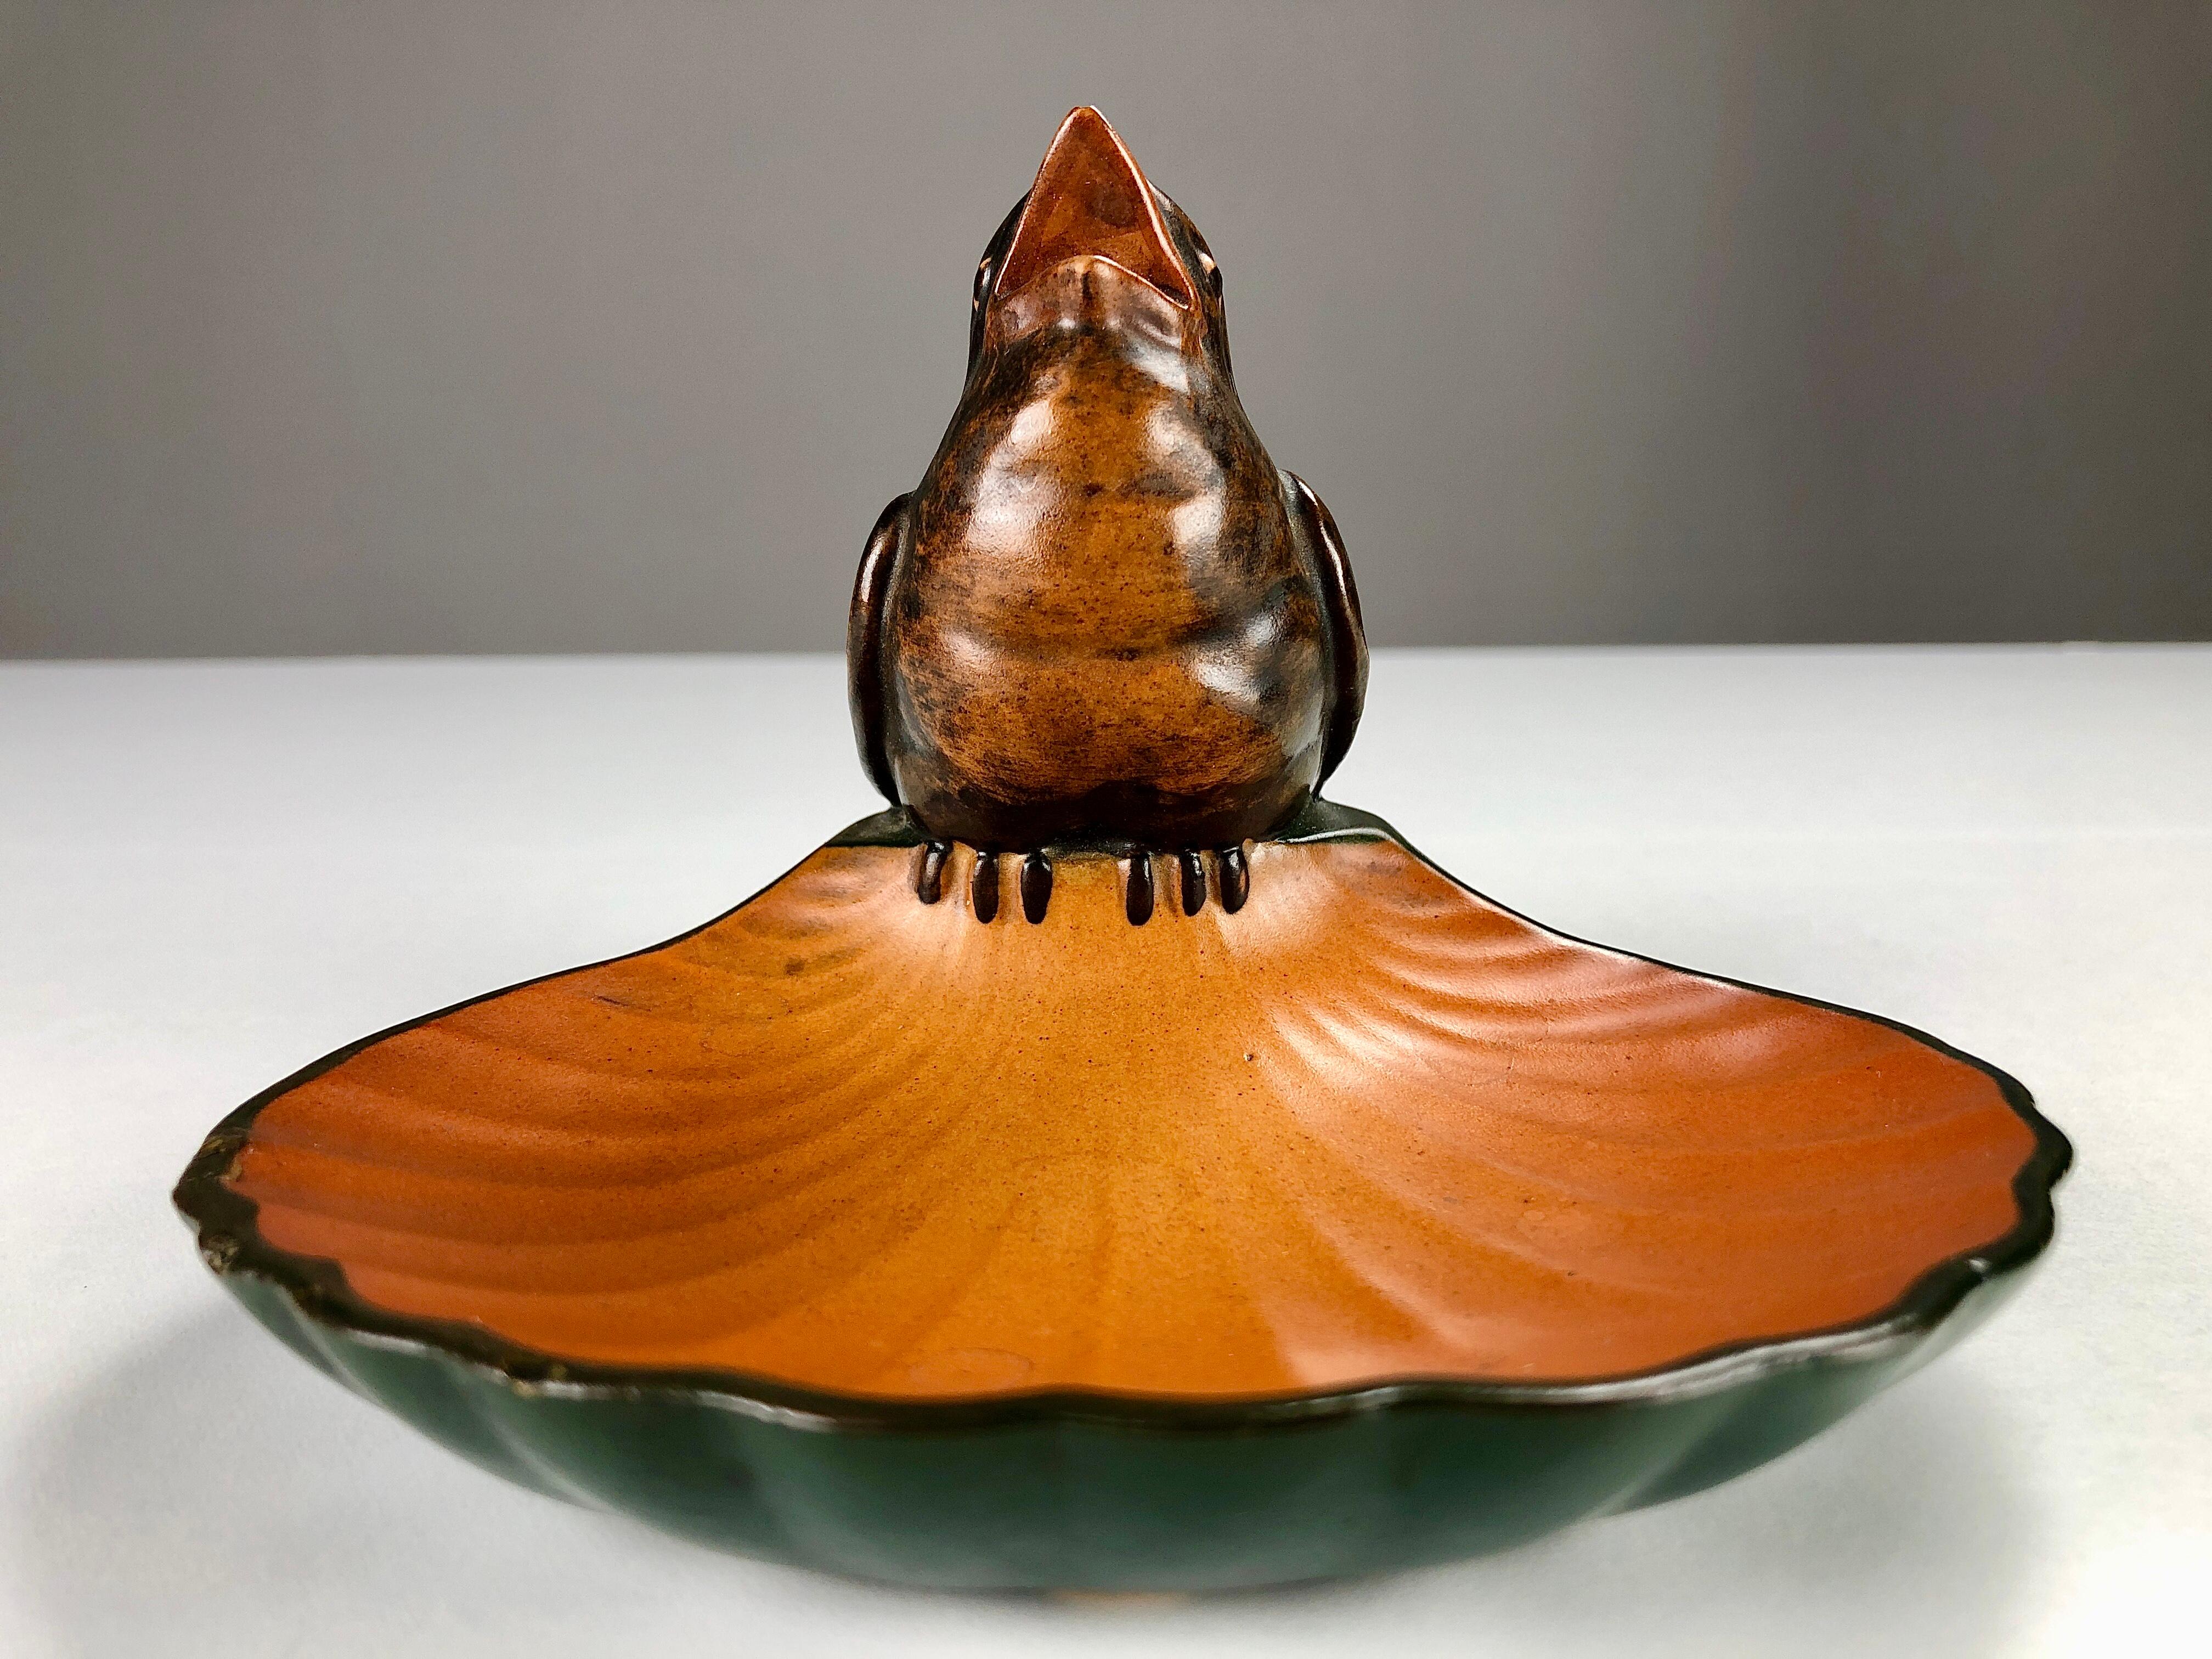 Hand-crafted Danish Art Nouveau ash tray / bowl designed by Axel Sørensen in 1927 for P. Ipsens Enke.

The art nuveau ash tray / bowl feature a well made lively sparrow and is in excellent condition.

Ipsens Enke (1843 - 1955) was a very succesfull